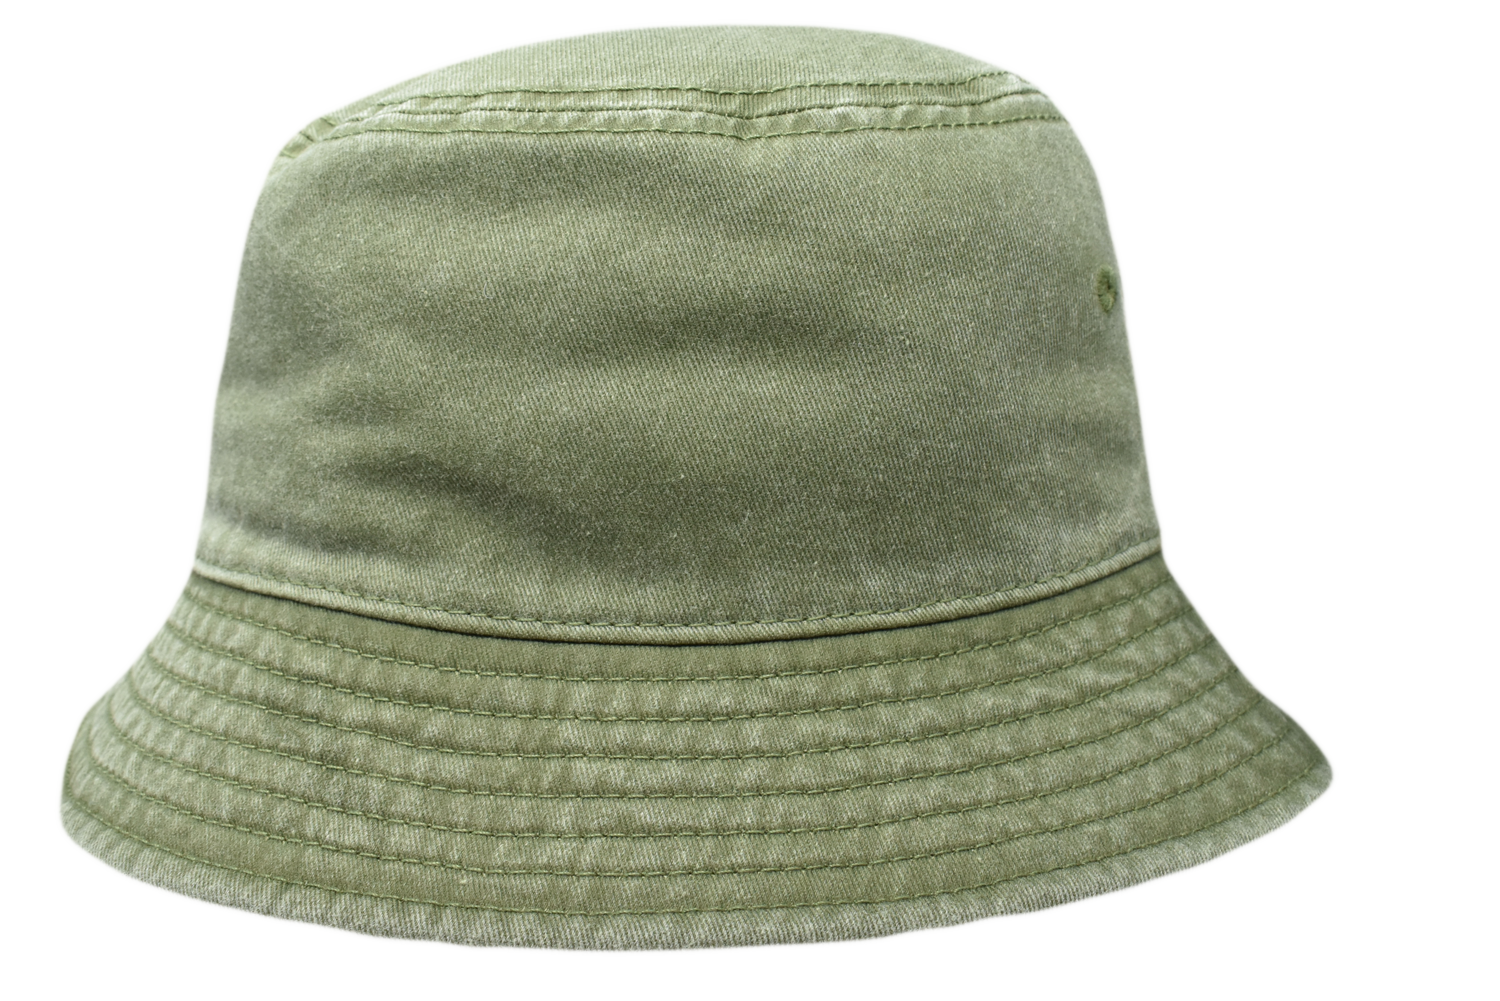 552 YOUTH PIGMENT DYED WASHED COTTON BUCKET HAT - Fahrenheit Headwear